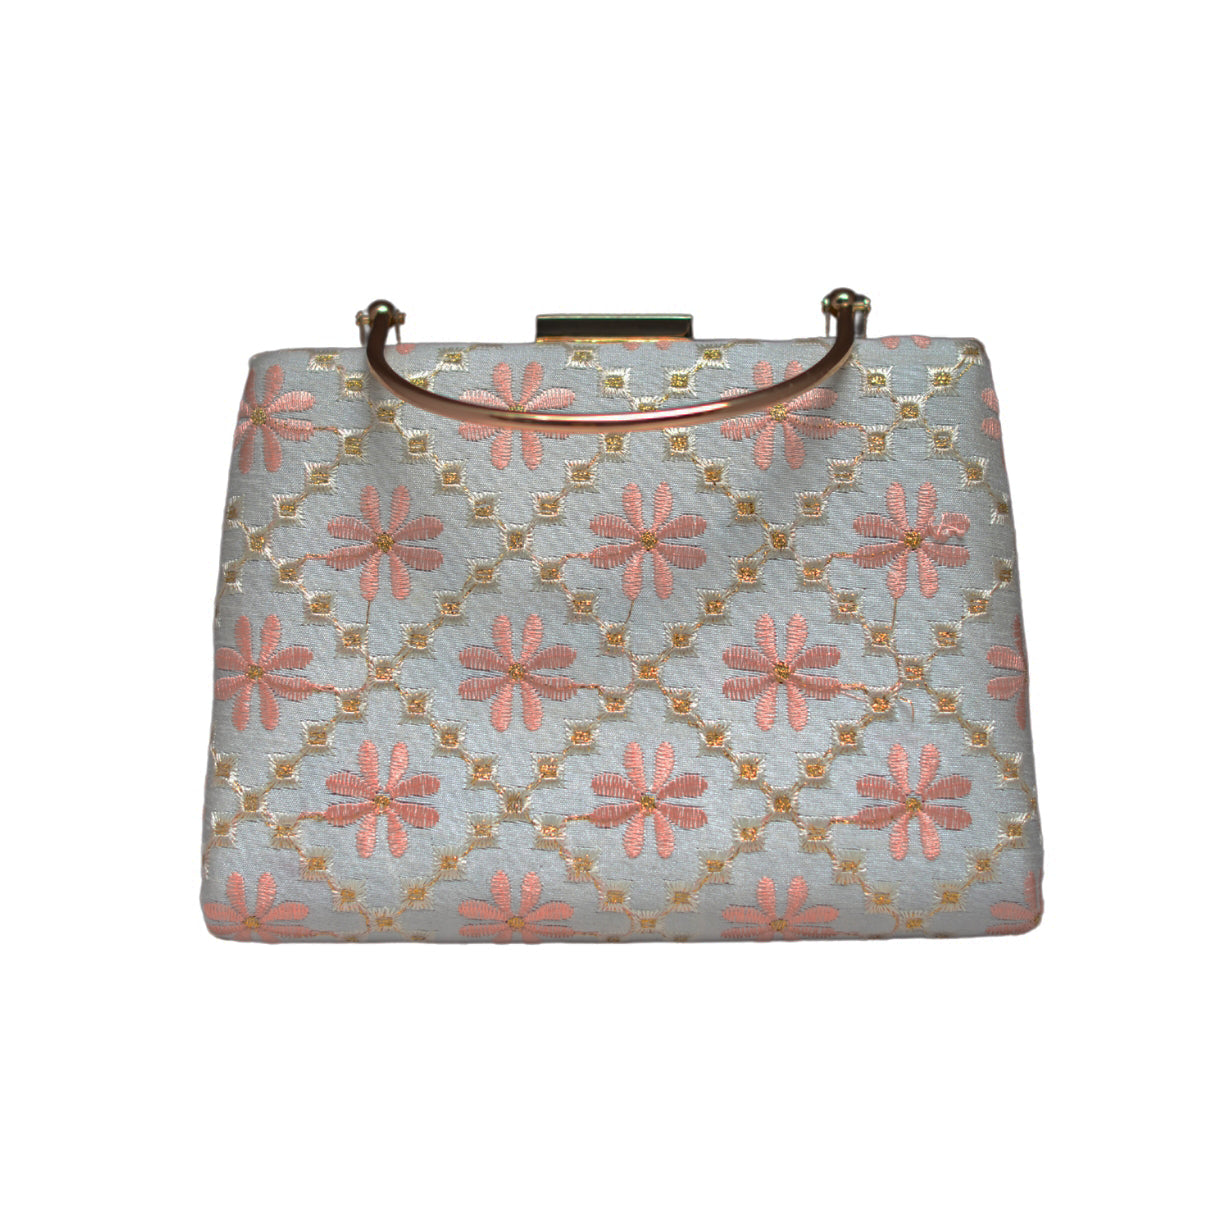 White and Pink Floral Embroidery Clutch